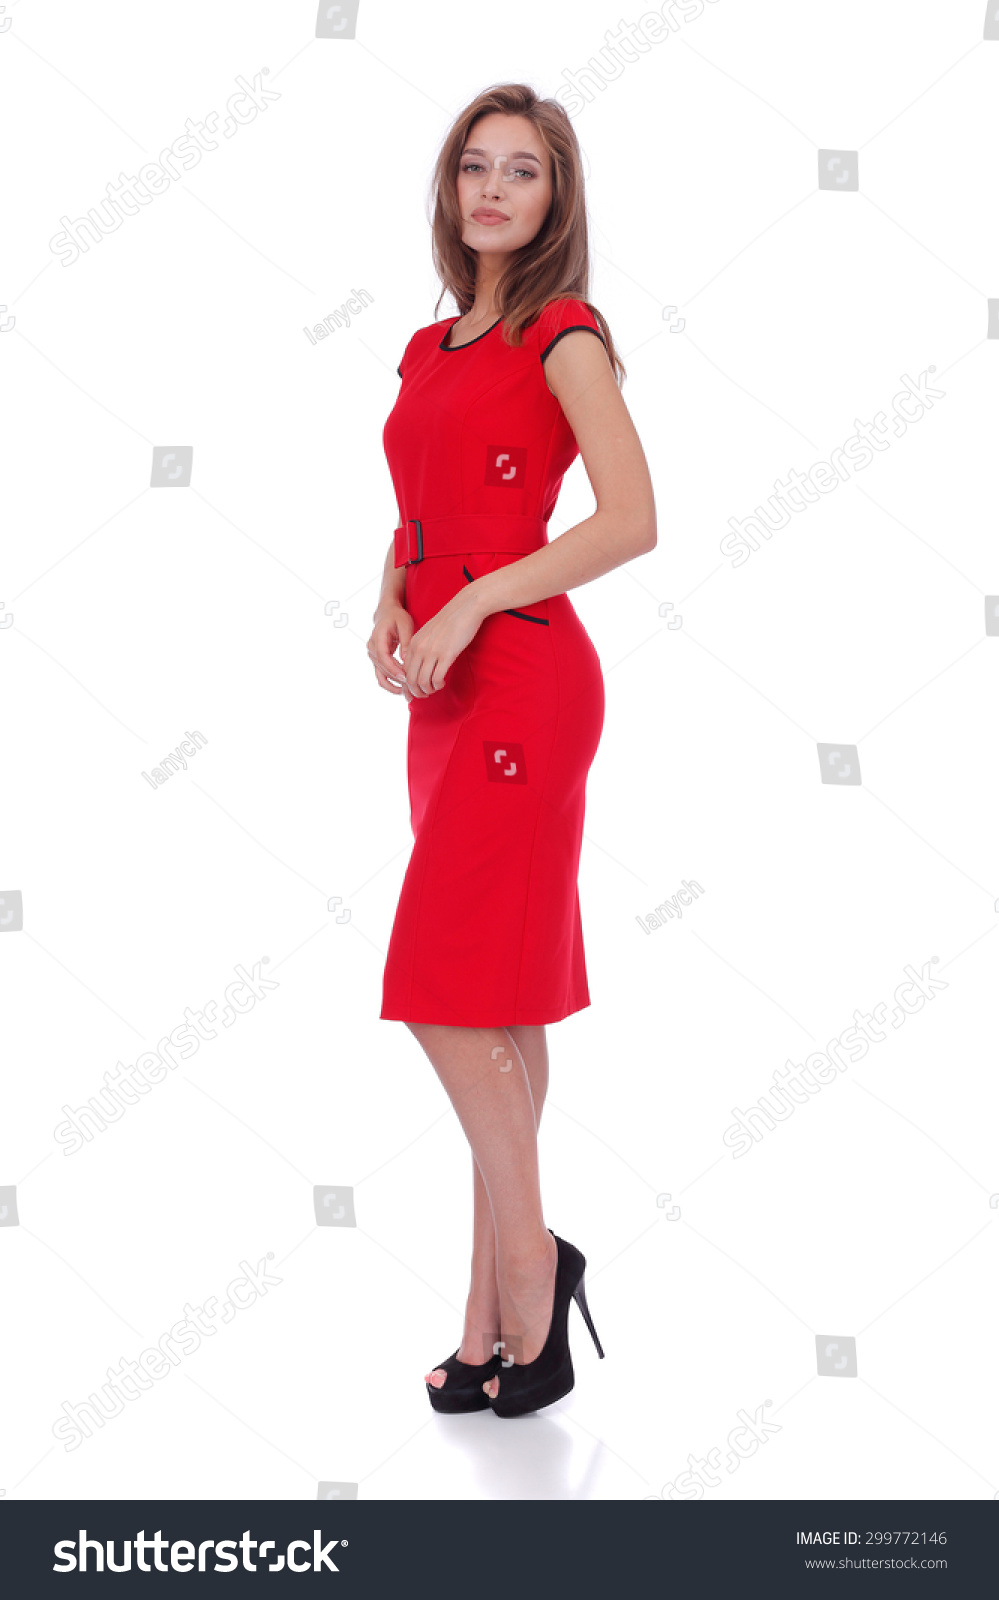 Pretty Young Girl Wearing Red Dress Stock Photo 299772146 : Shutterstock